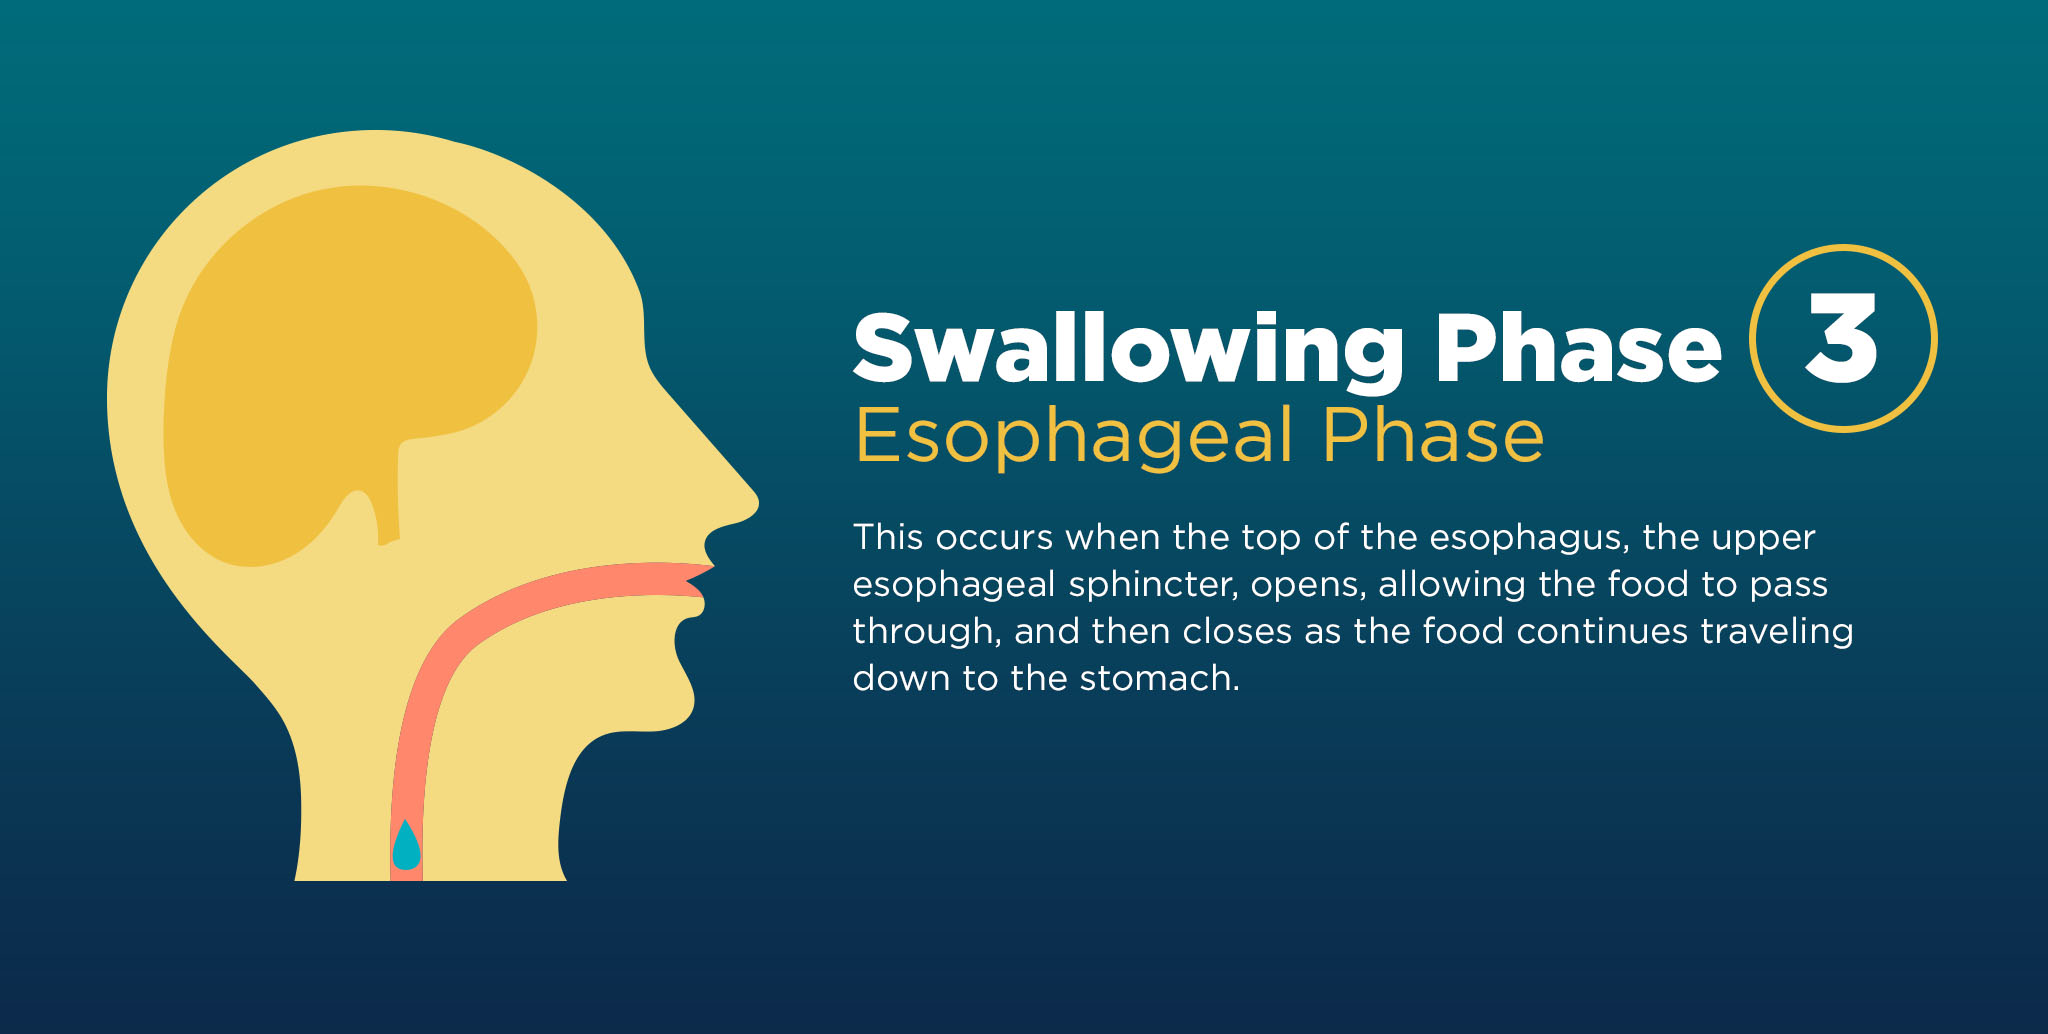 explanation of the third phase of the swallowing process, know as the esophageal phase. Dysphagia can occur at any phase. 